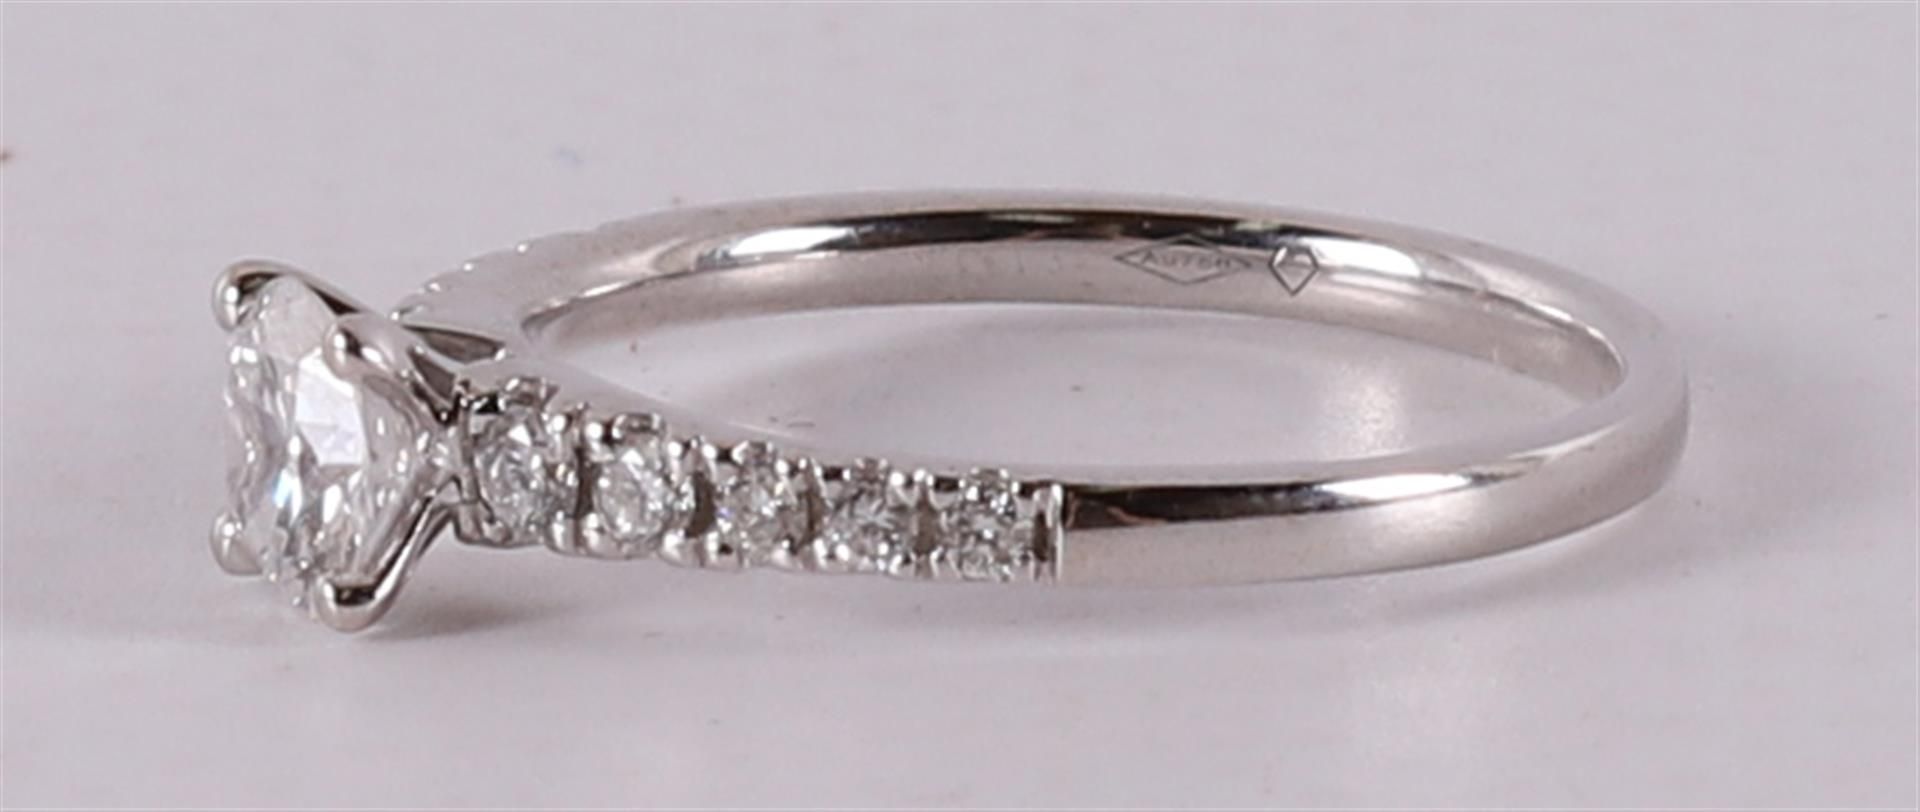 An 18 kt white gold women's ring, set with 0.45 crt brilliant cut diamond - Image 2 of 4